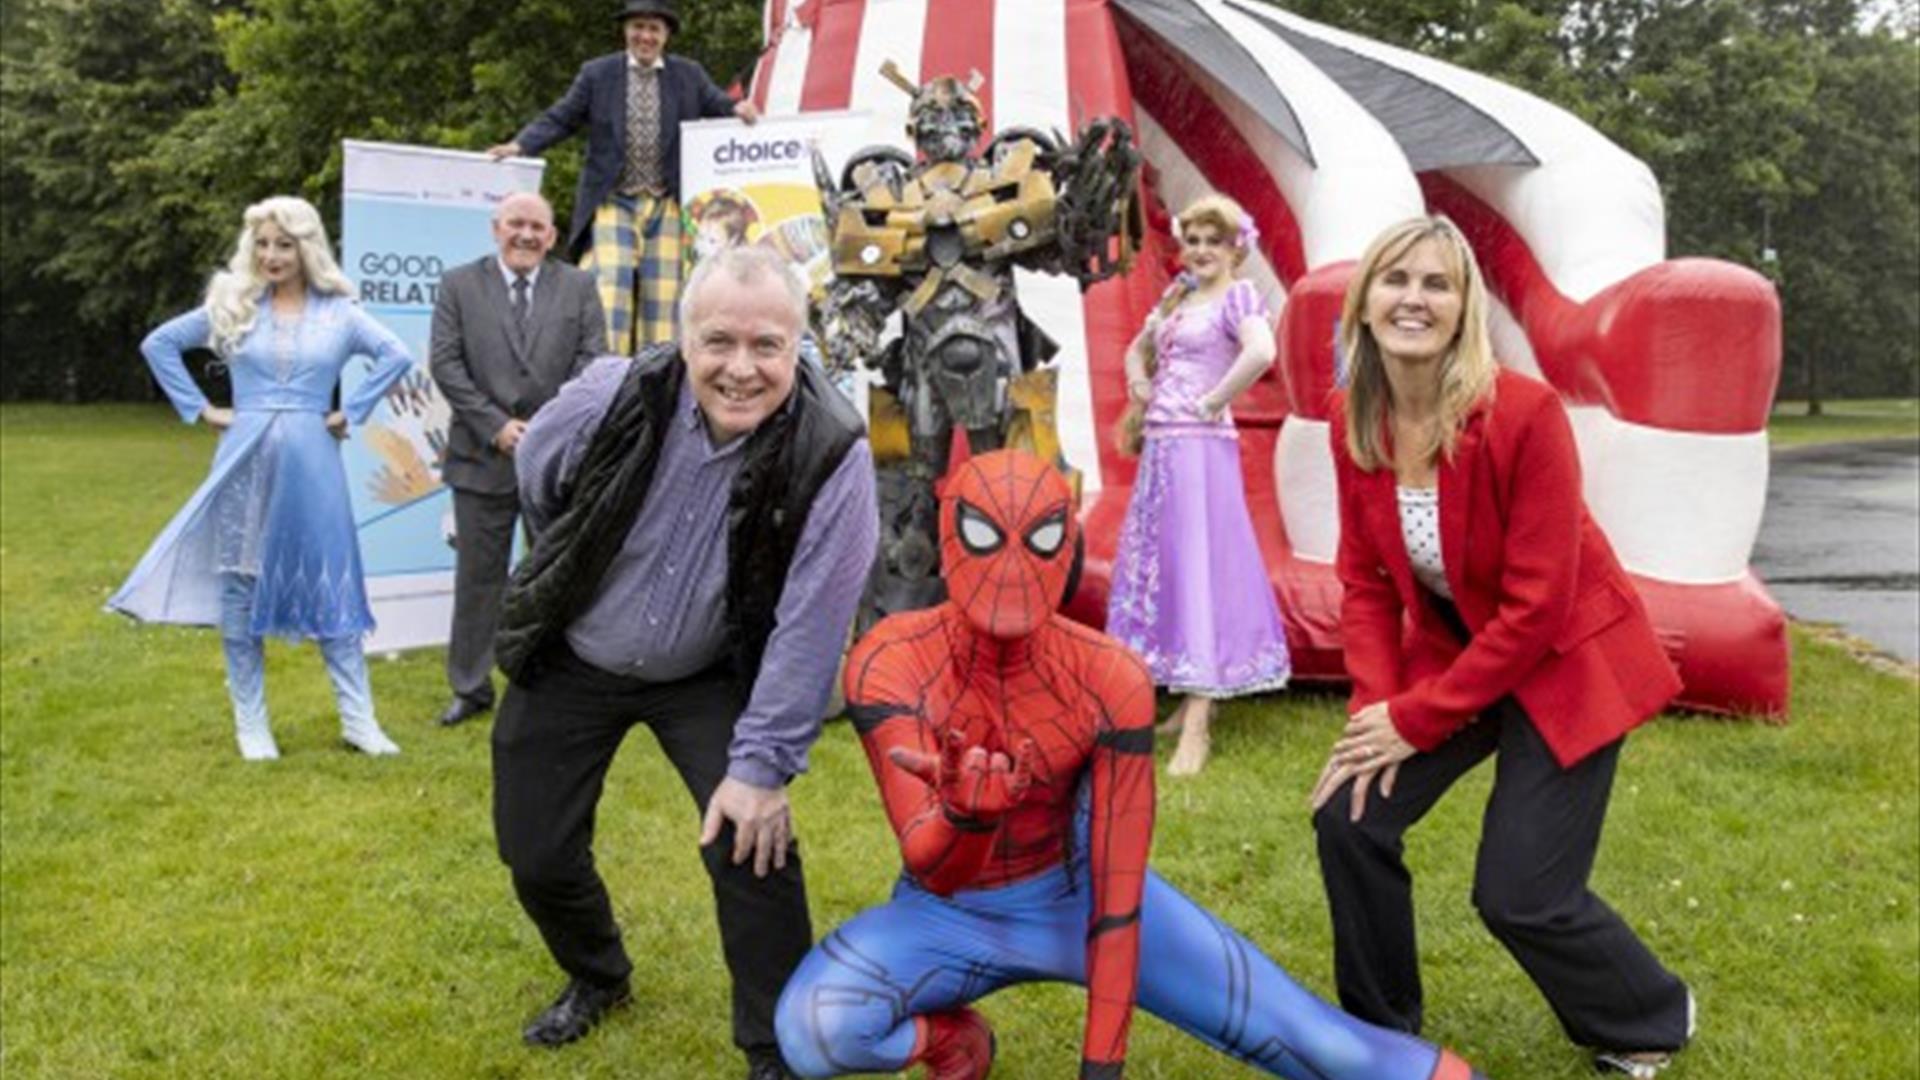 Image is of characters in the Park Life event at Moat Park Dundonald